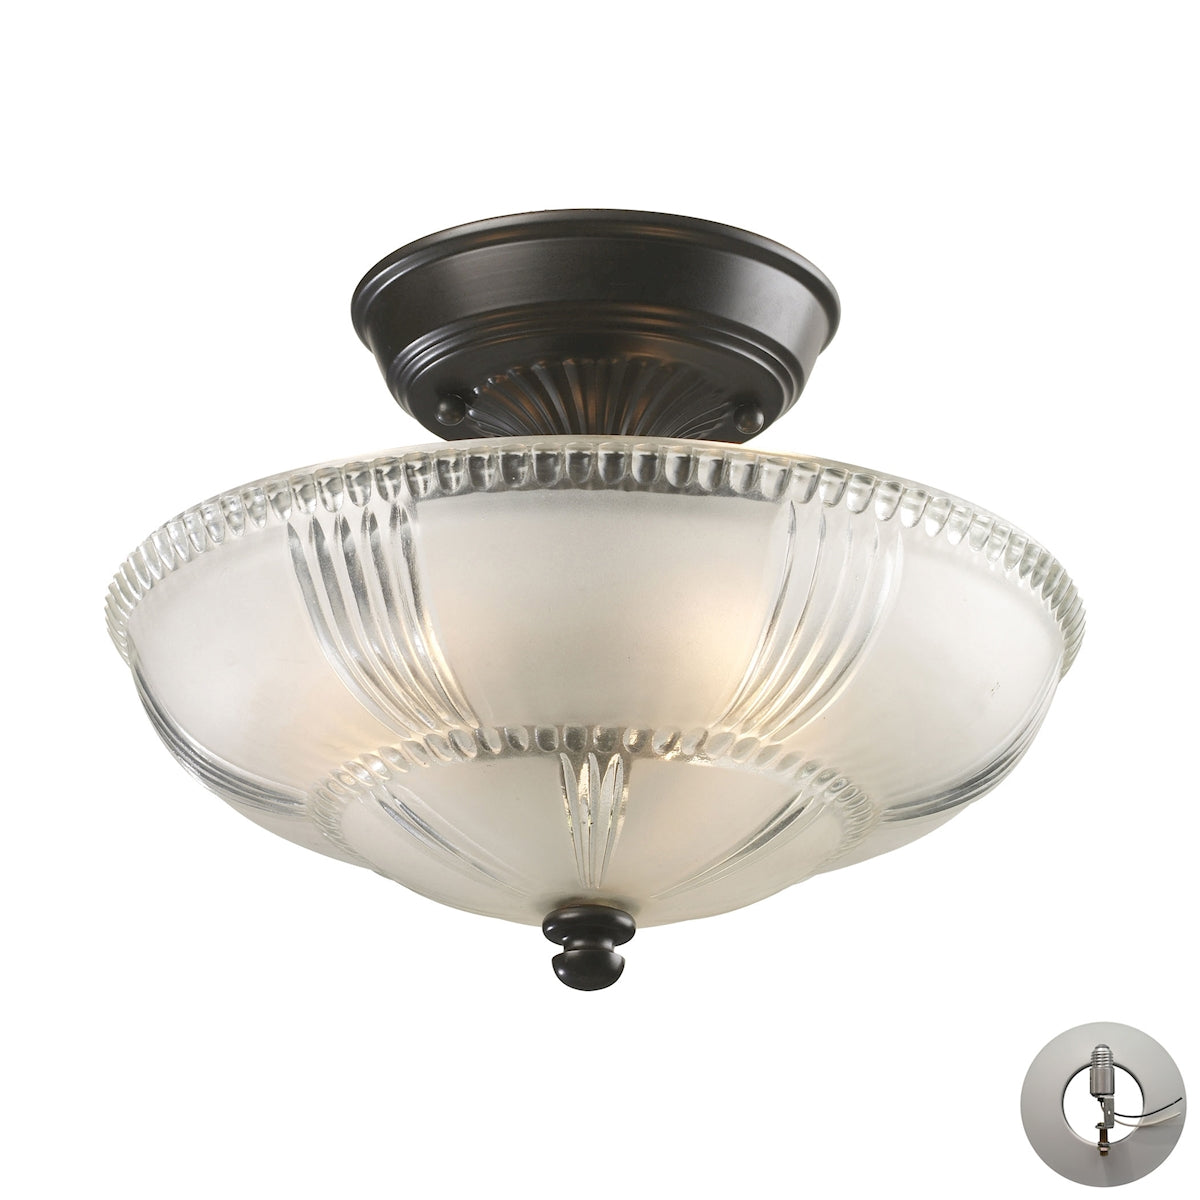 ELK Lighting 66335-3-LA Restoration 3-Light Semi Flush in Oiled Bronze with Clear and Frosted Glass - Includes Adapter Kit